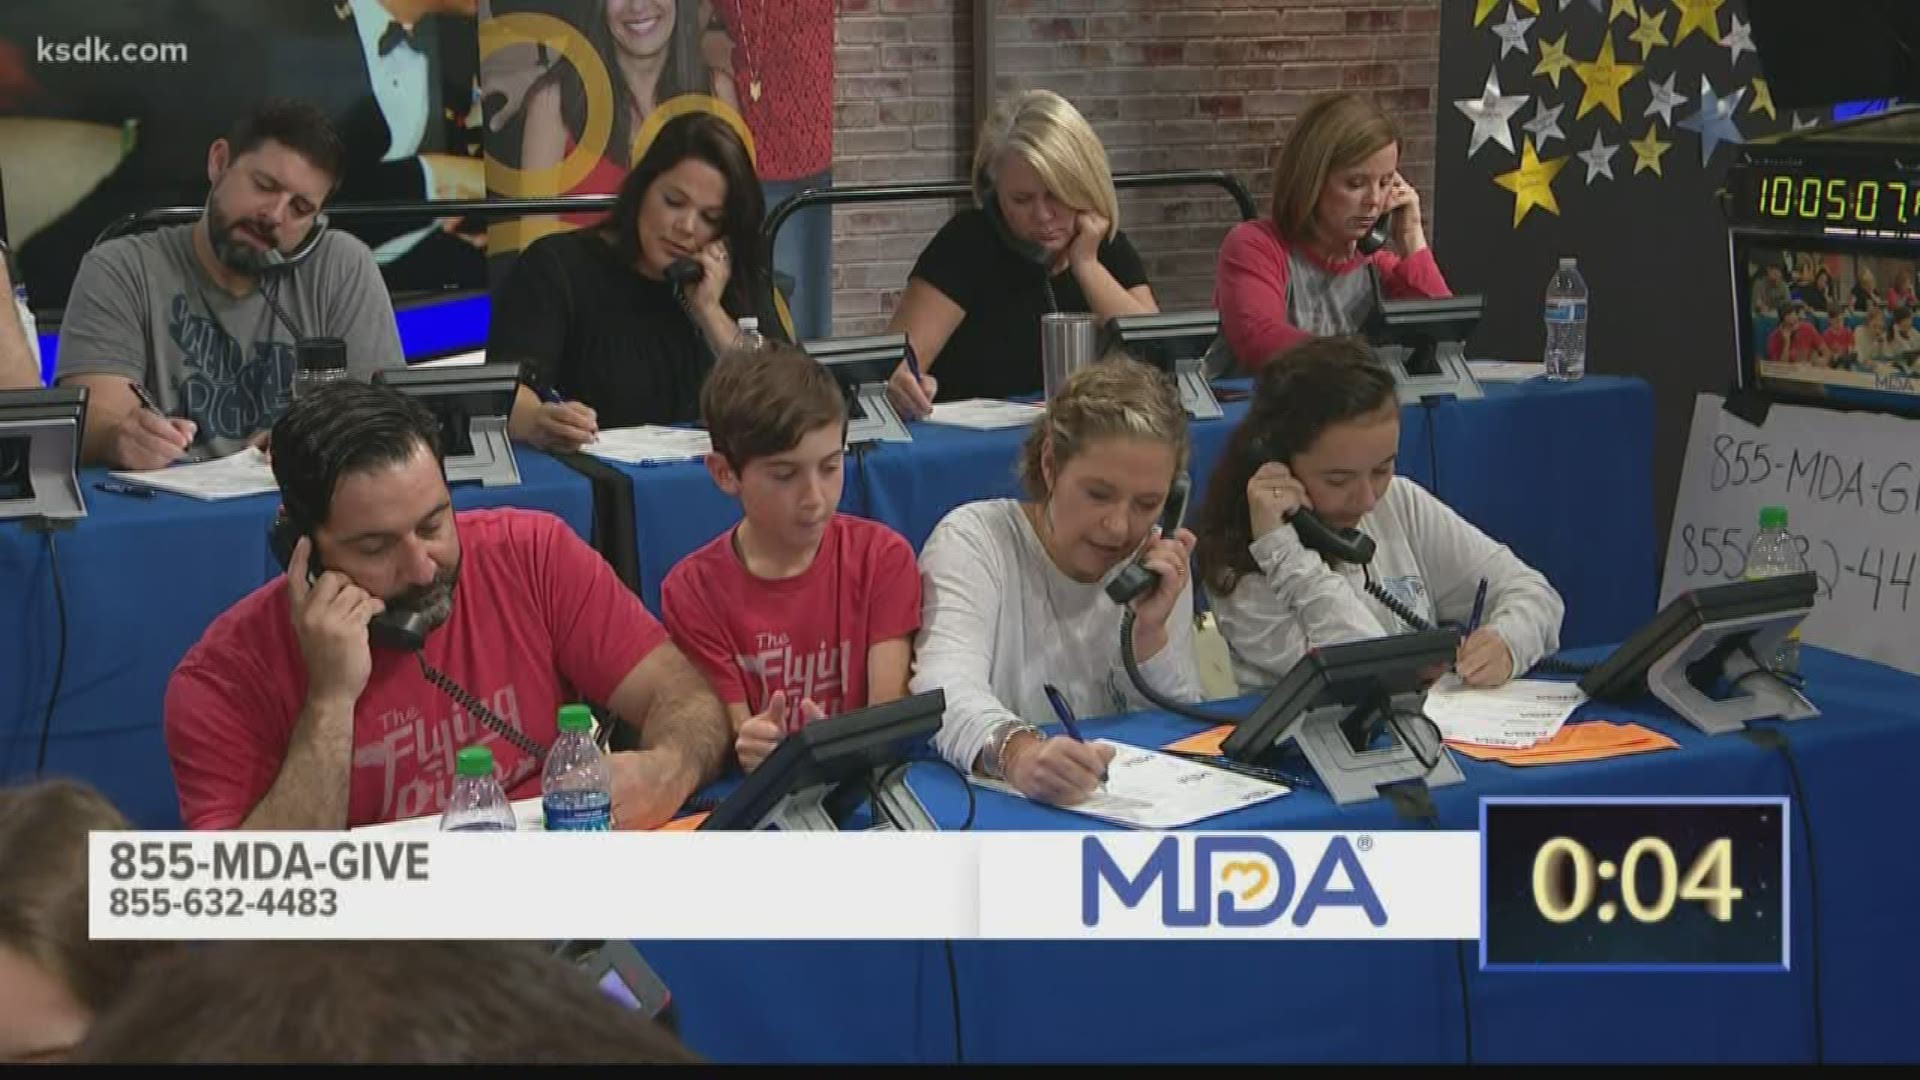 Thank you so much to all our viewers who helped make this year’s telethon an amazing success!